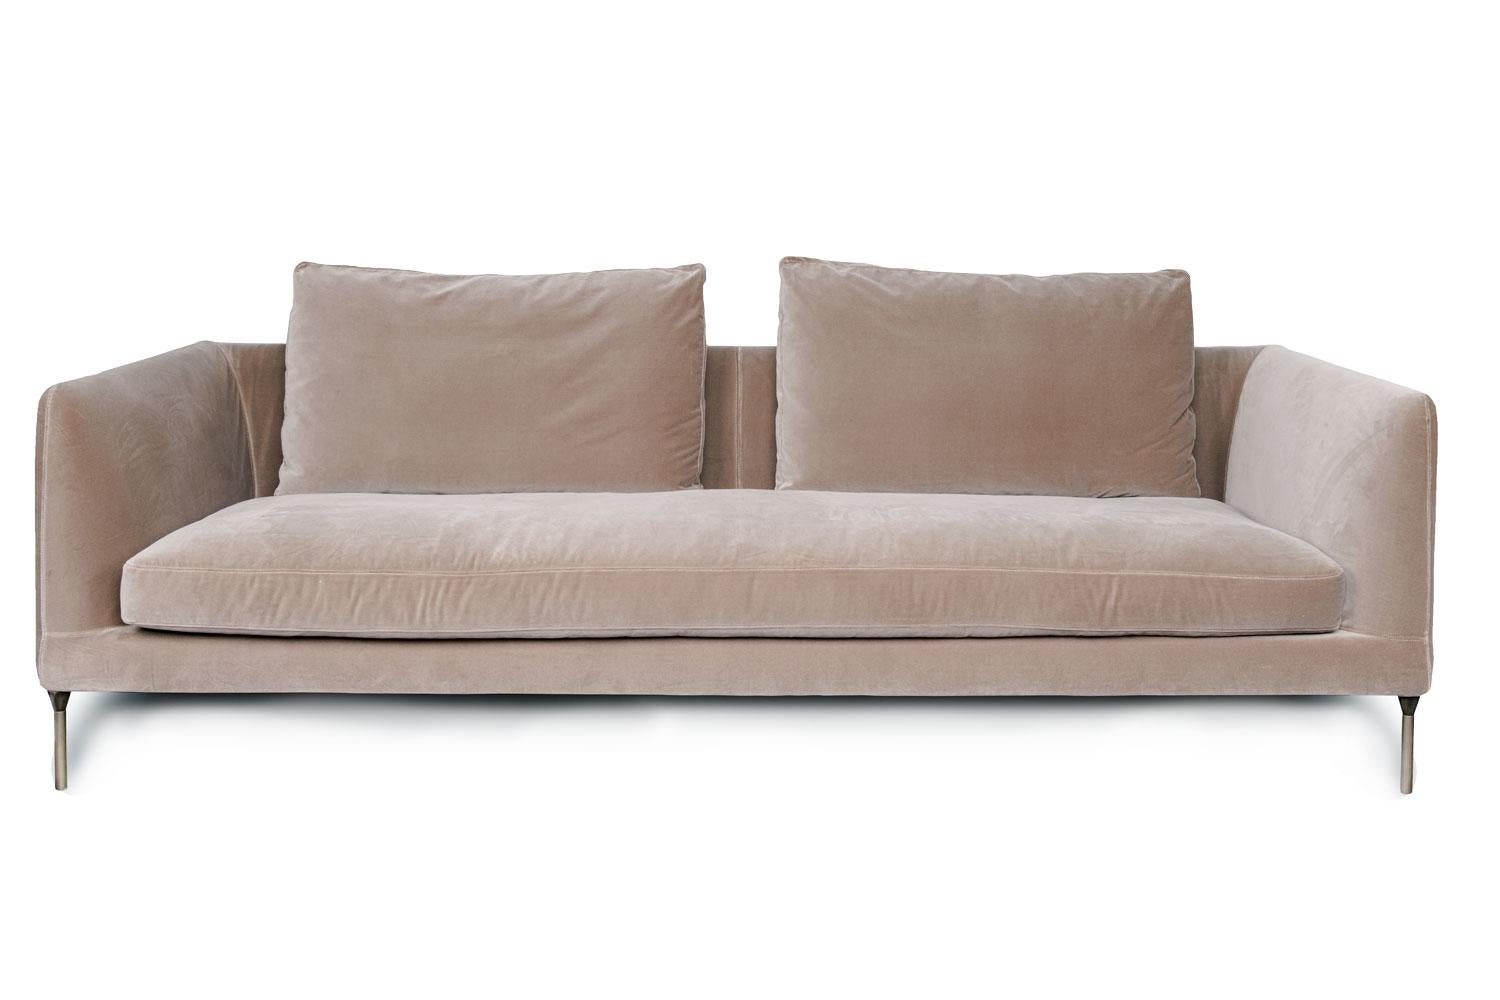 Delta sofa By Bensen

Cafe colored 100% cotton velvet upholstered removable cover straight style sofa with bronze metal legs. Smooth surfaces and soft, down-filled cushions, the Delta is a fresh and young addition to the Bensen collection. The